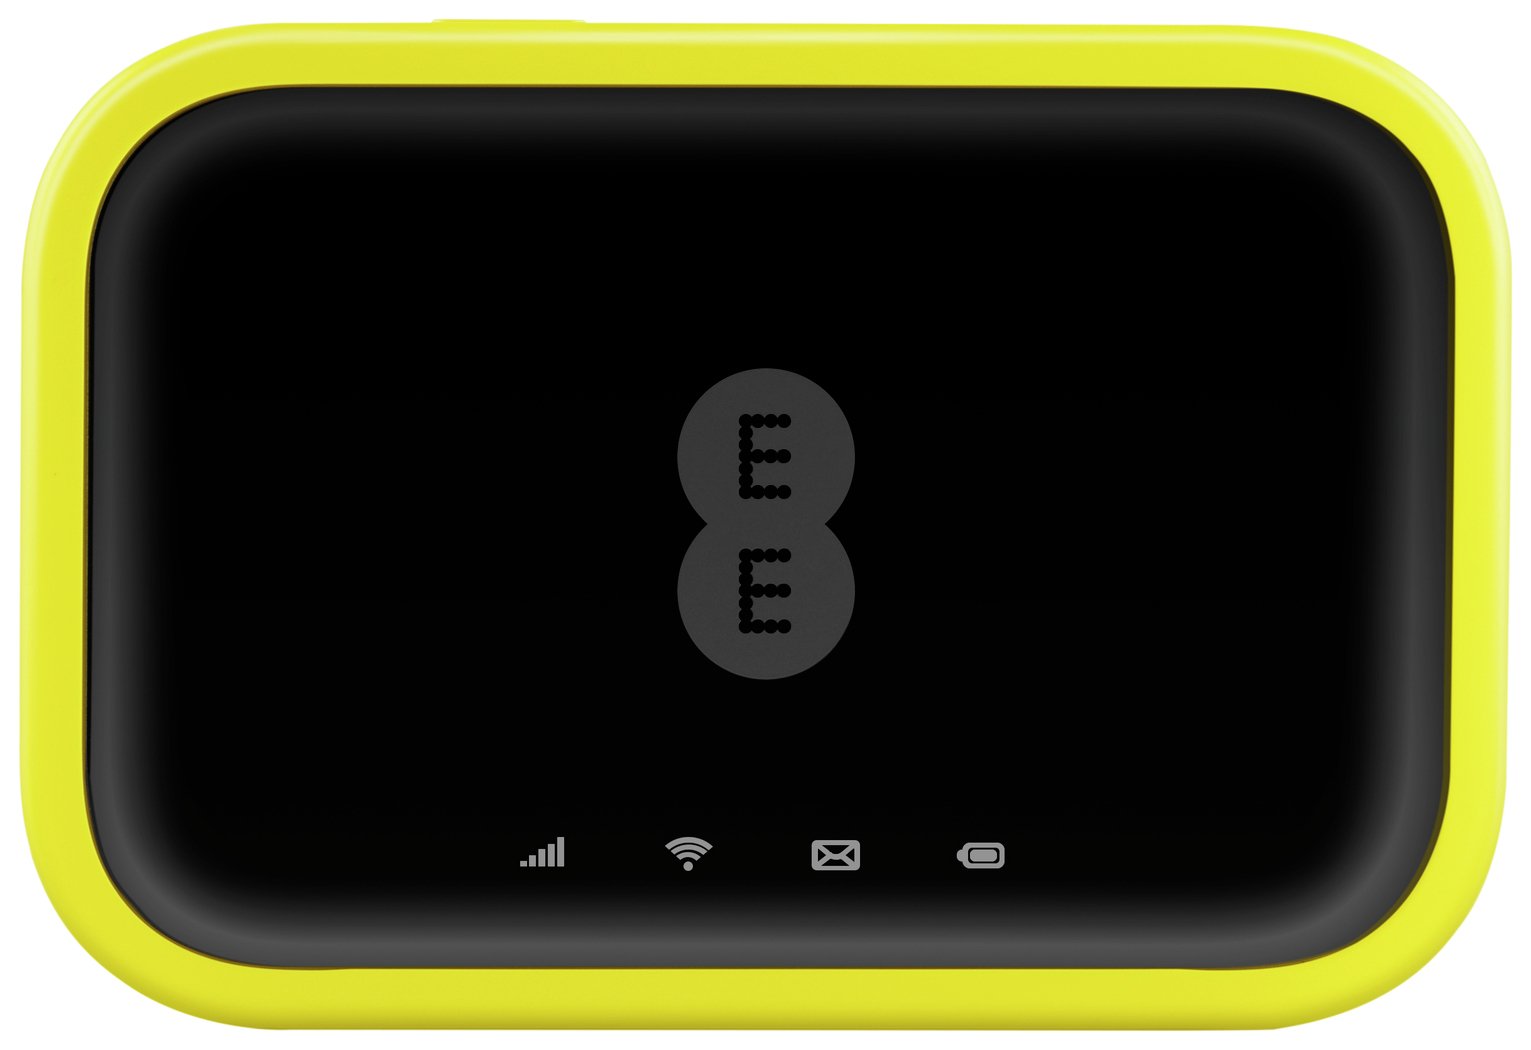 EE 4G 20GB Mobile Wi-Fi Router